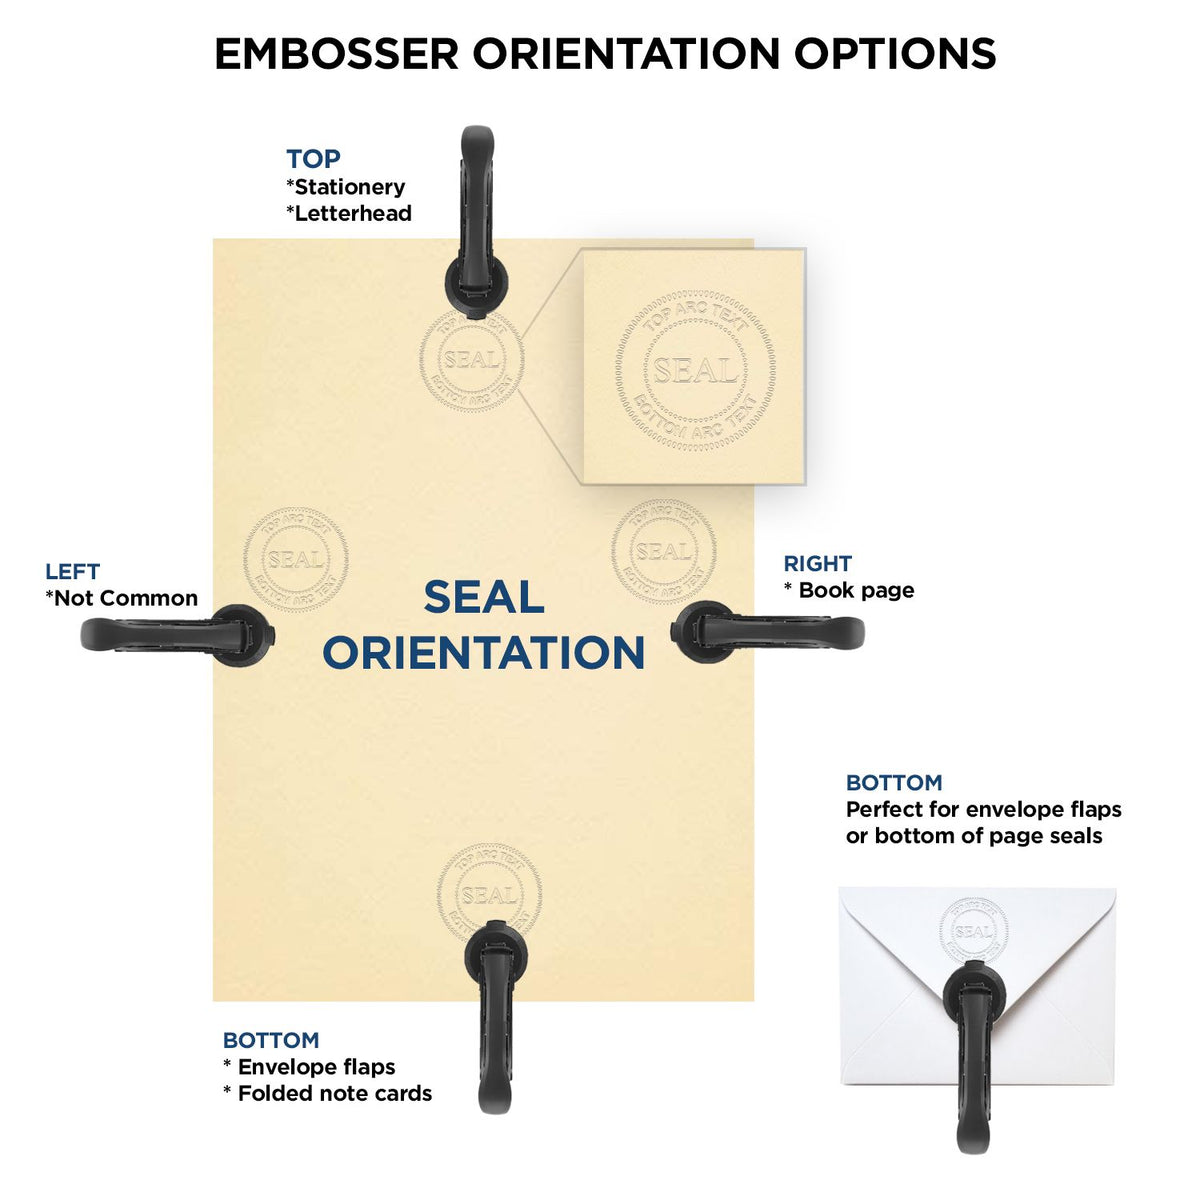 An infographic for the Gift Texas Architect Seal showing embosser orientation, this is showing examples of a top, bottom, right and left insert.